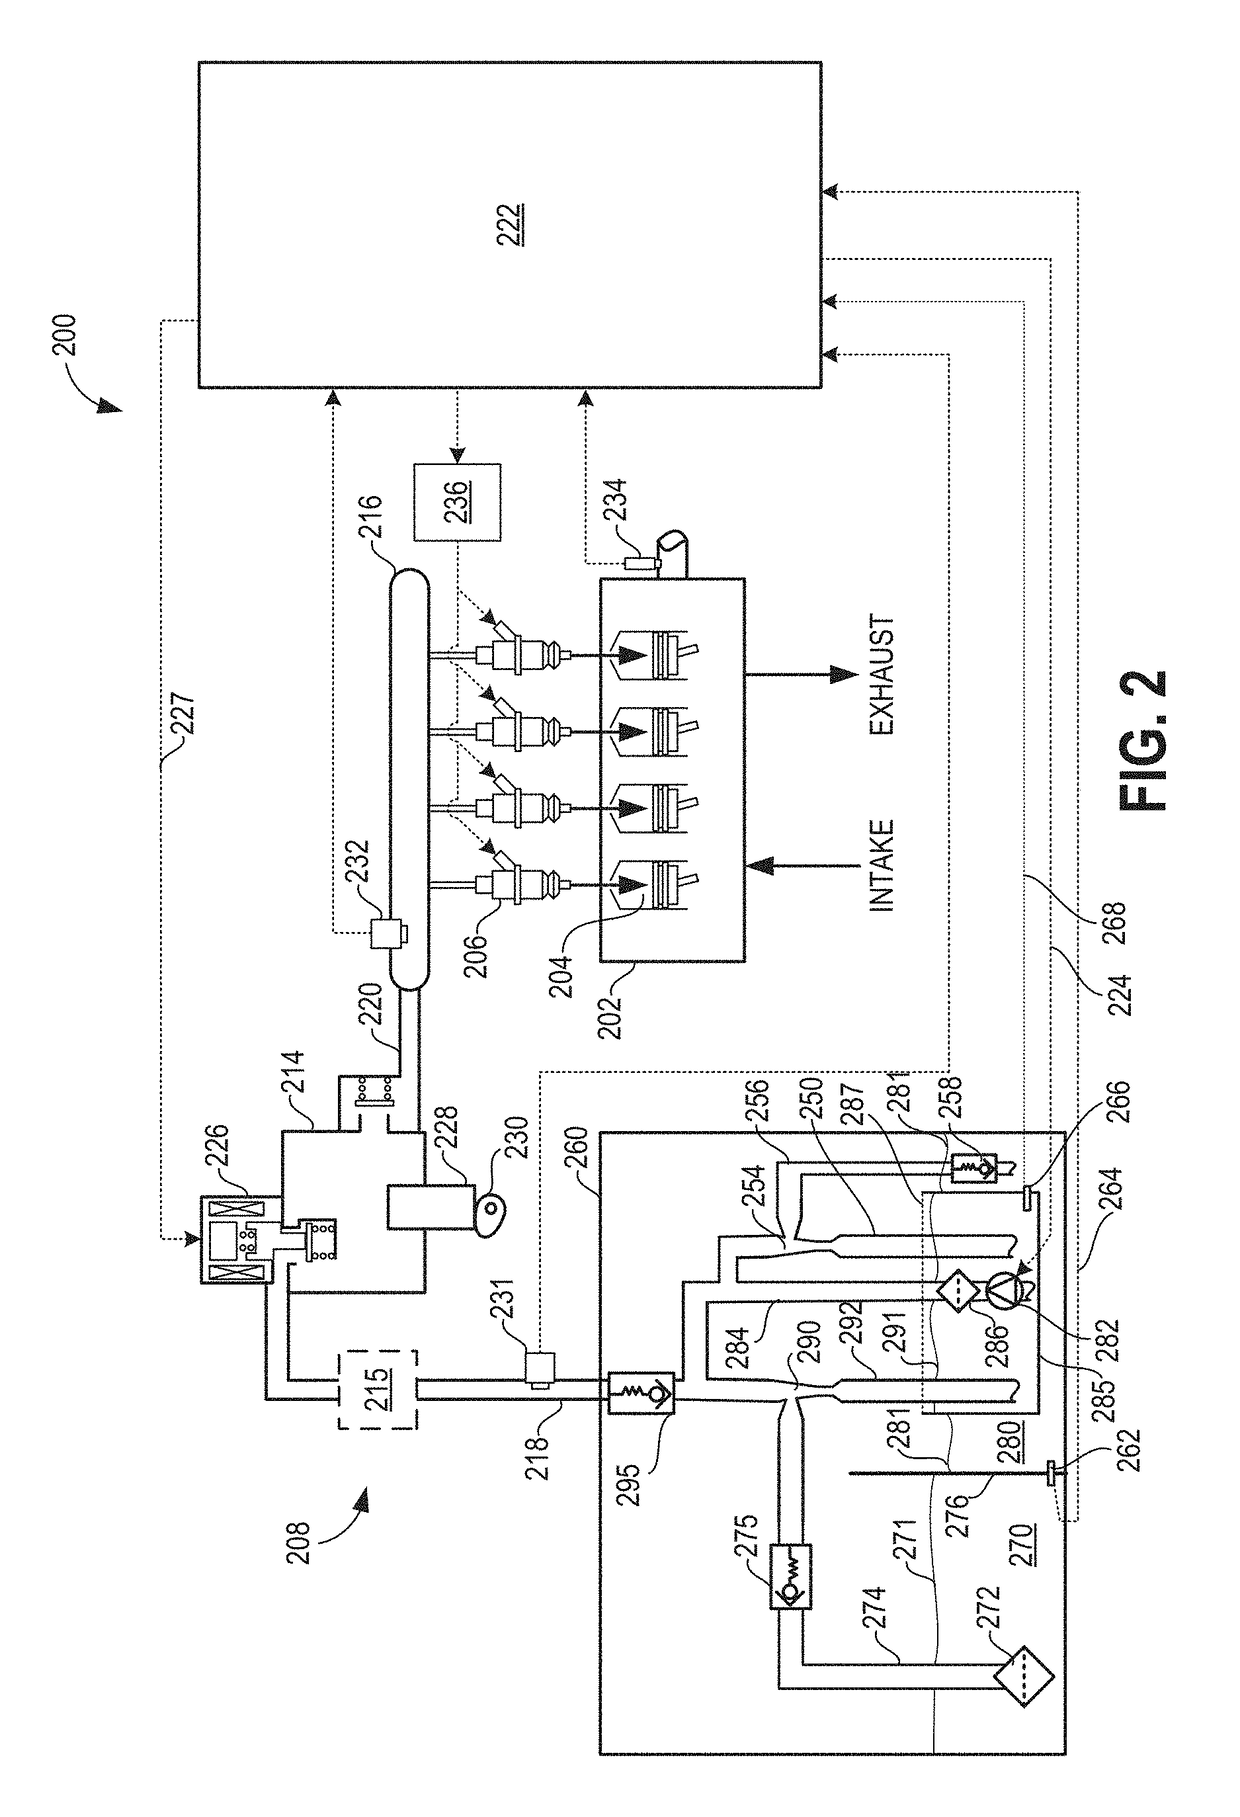 Method and system for fuel system control